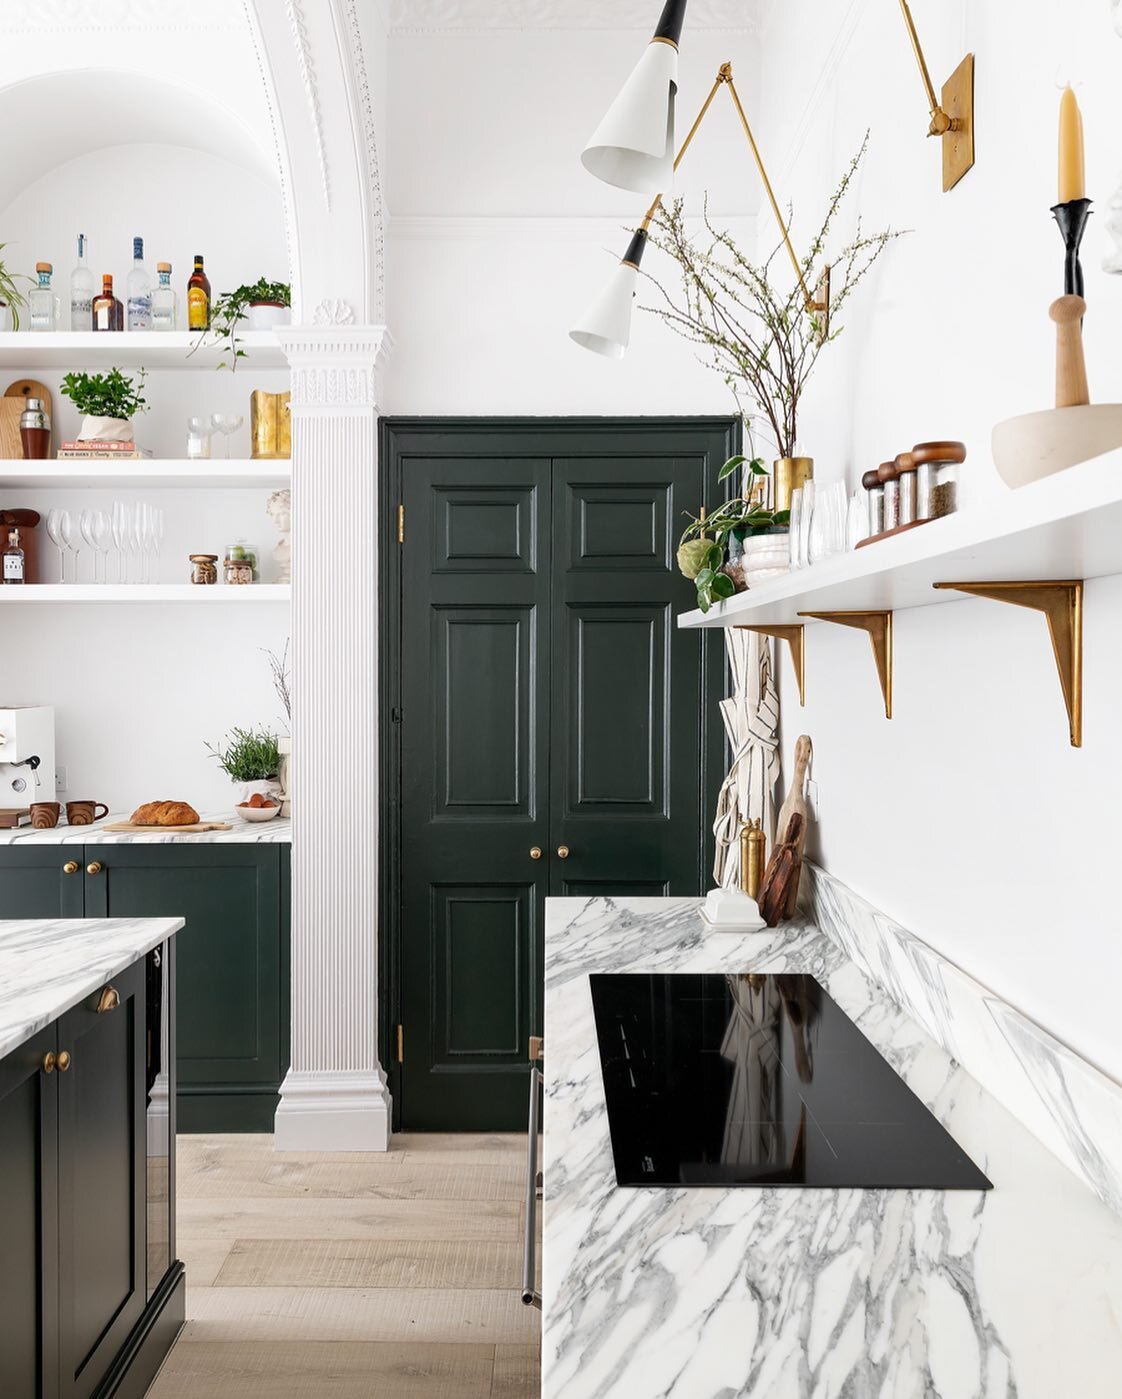 Kitchen spam continues on our latest project &lsquo;Henrietta Residence&rsquo; 😅. The beautiful marble benchtops are easily my favourite part of the kitchen. I fell in love with this marble as soon as I saw it in the beautiful @brixtonhome kitchen ?